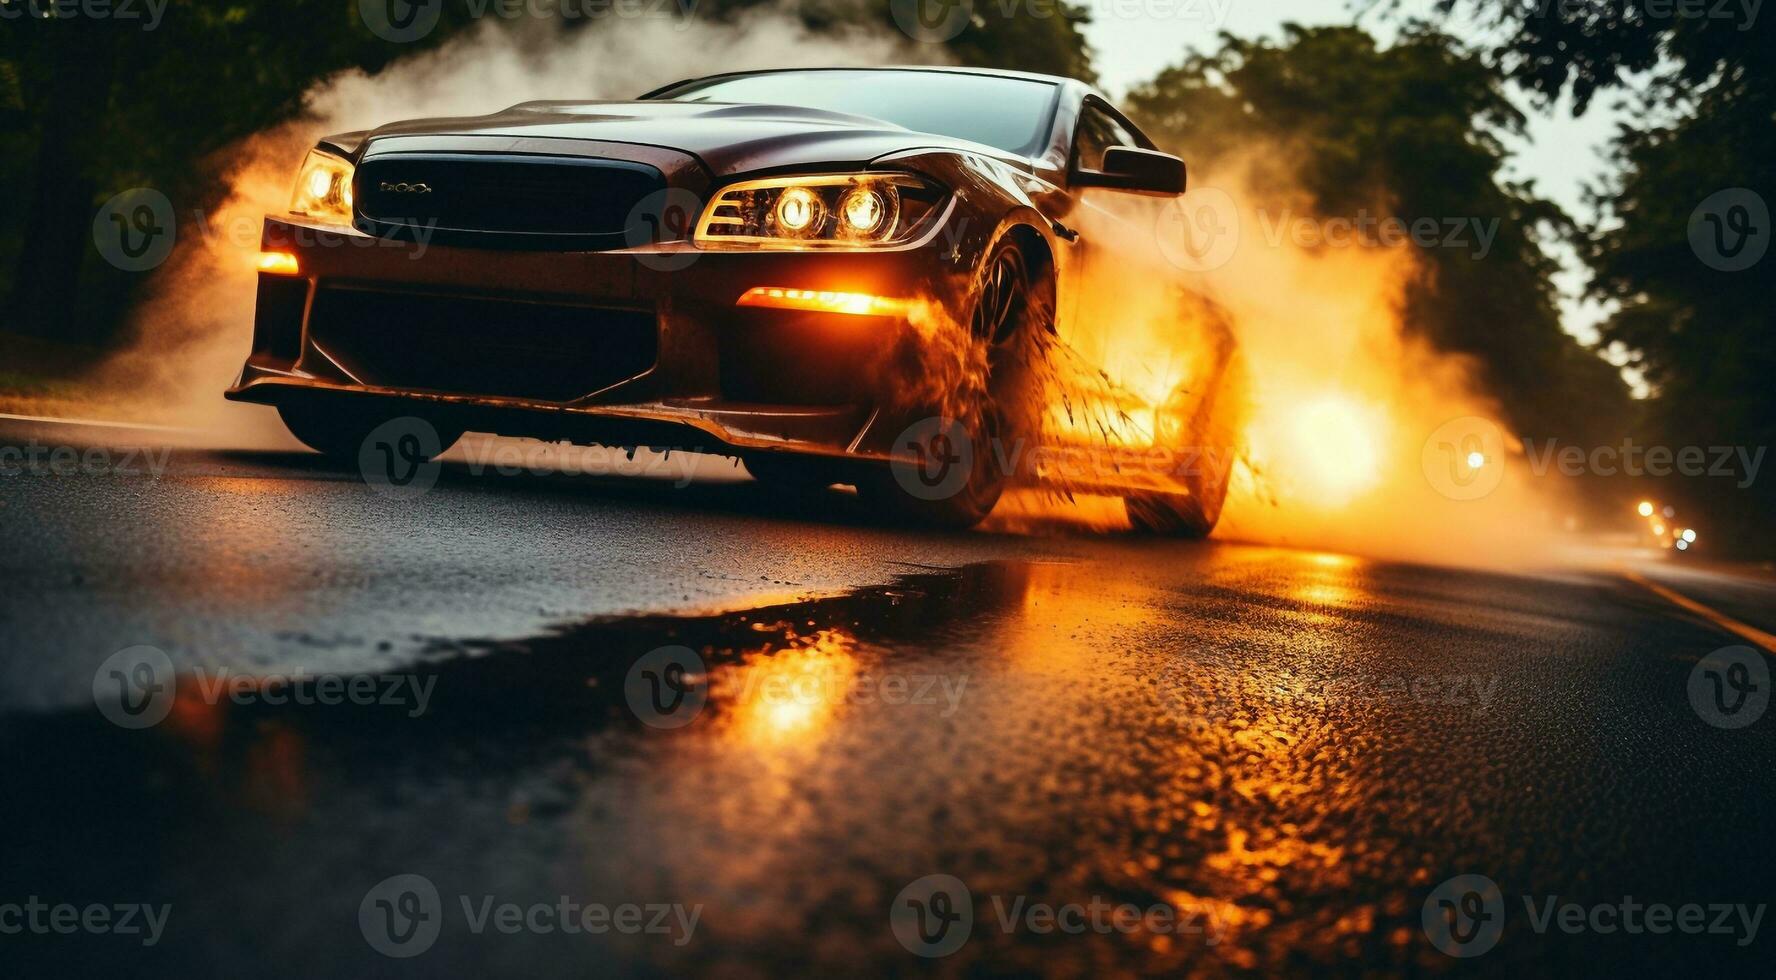 AI generated car driving on the road, close-up of a sports car doing burnout on the street, car doing burnout, close-up of car photo